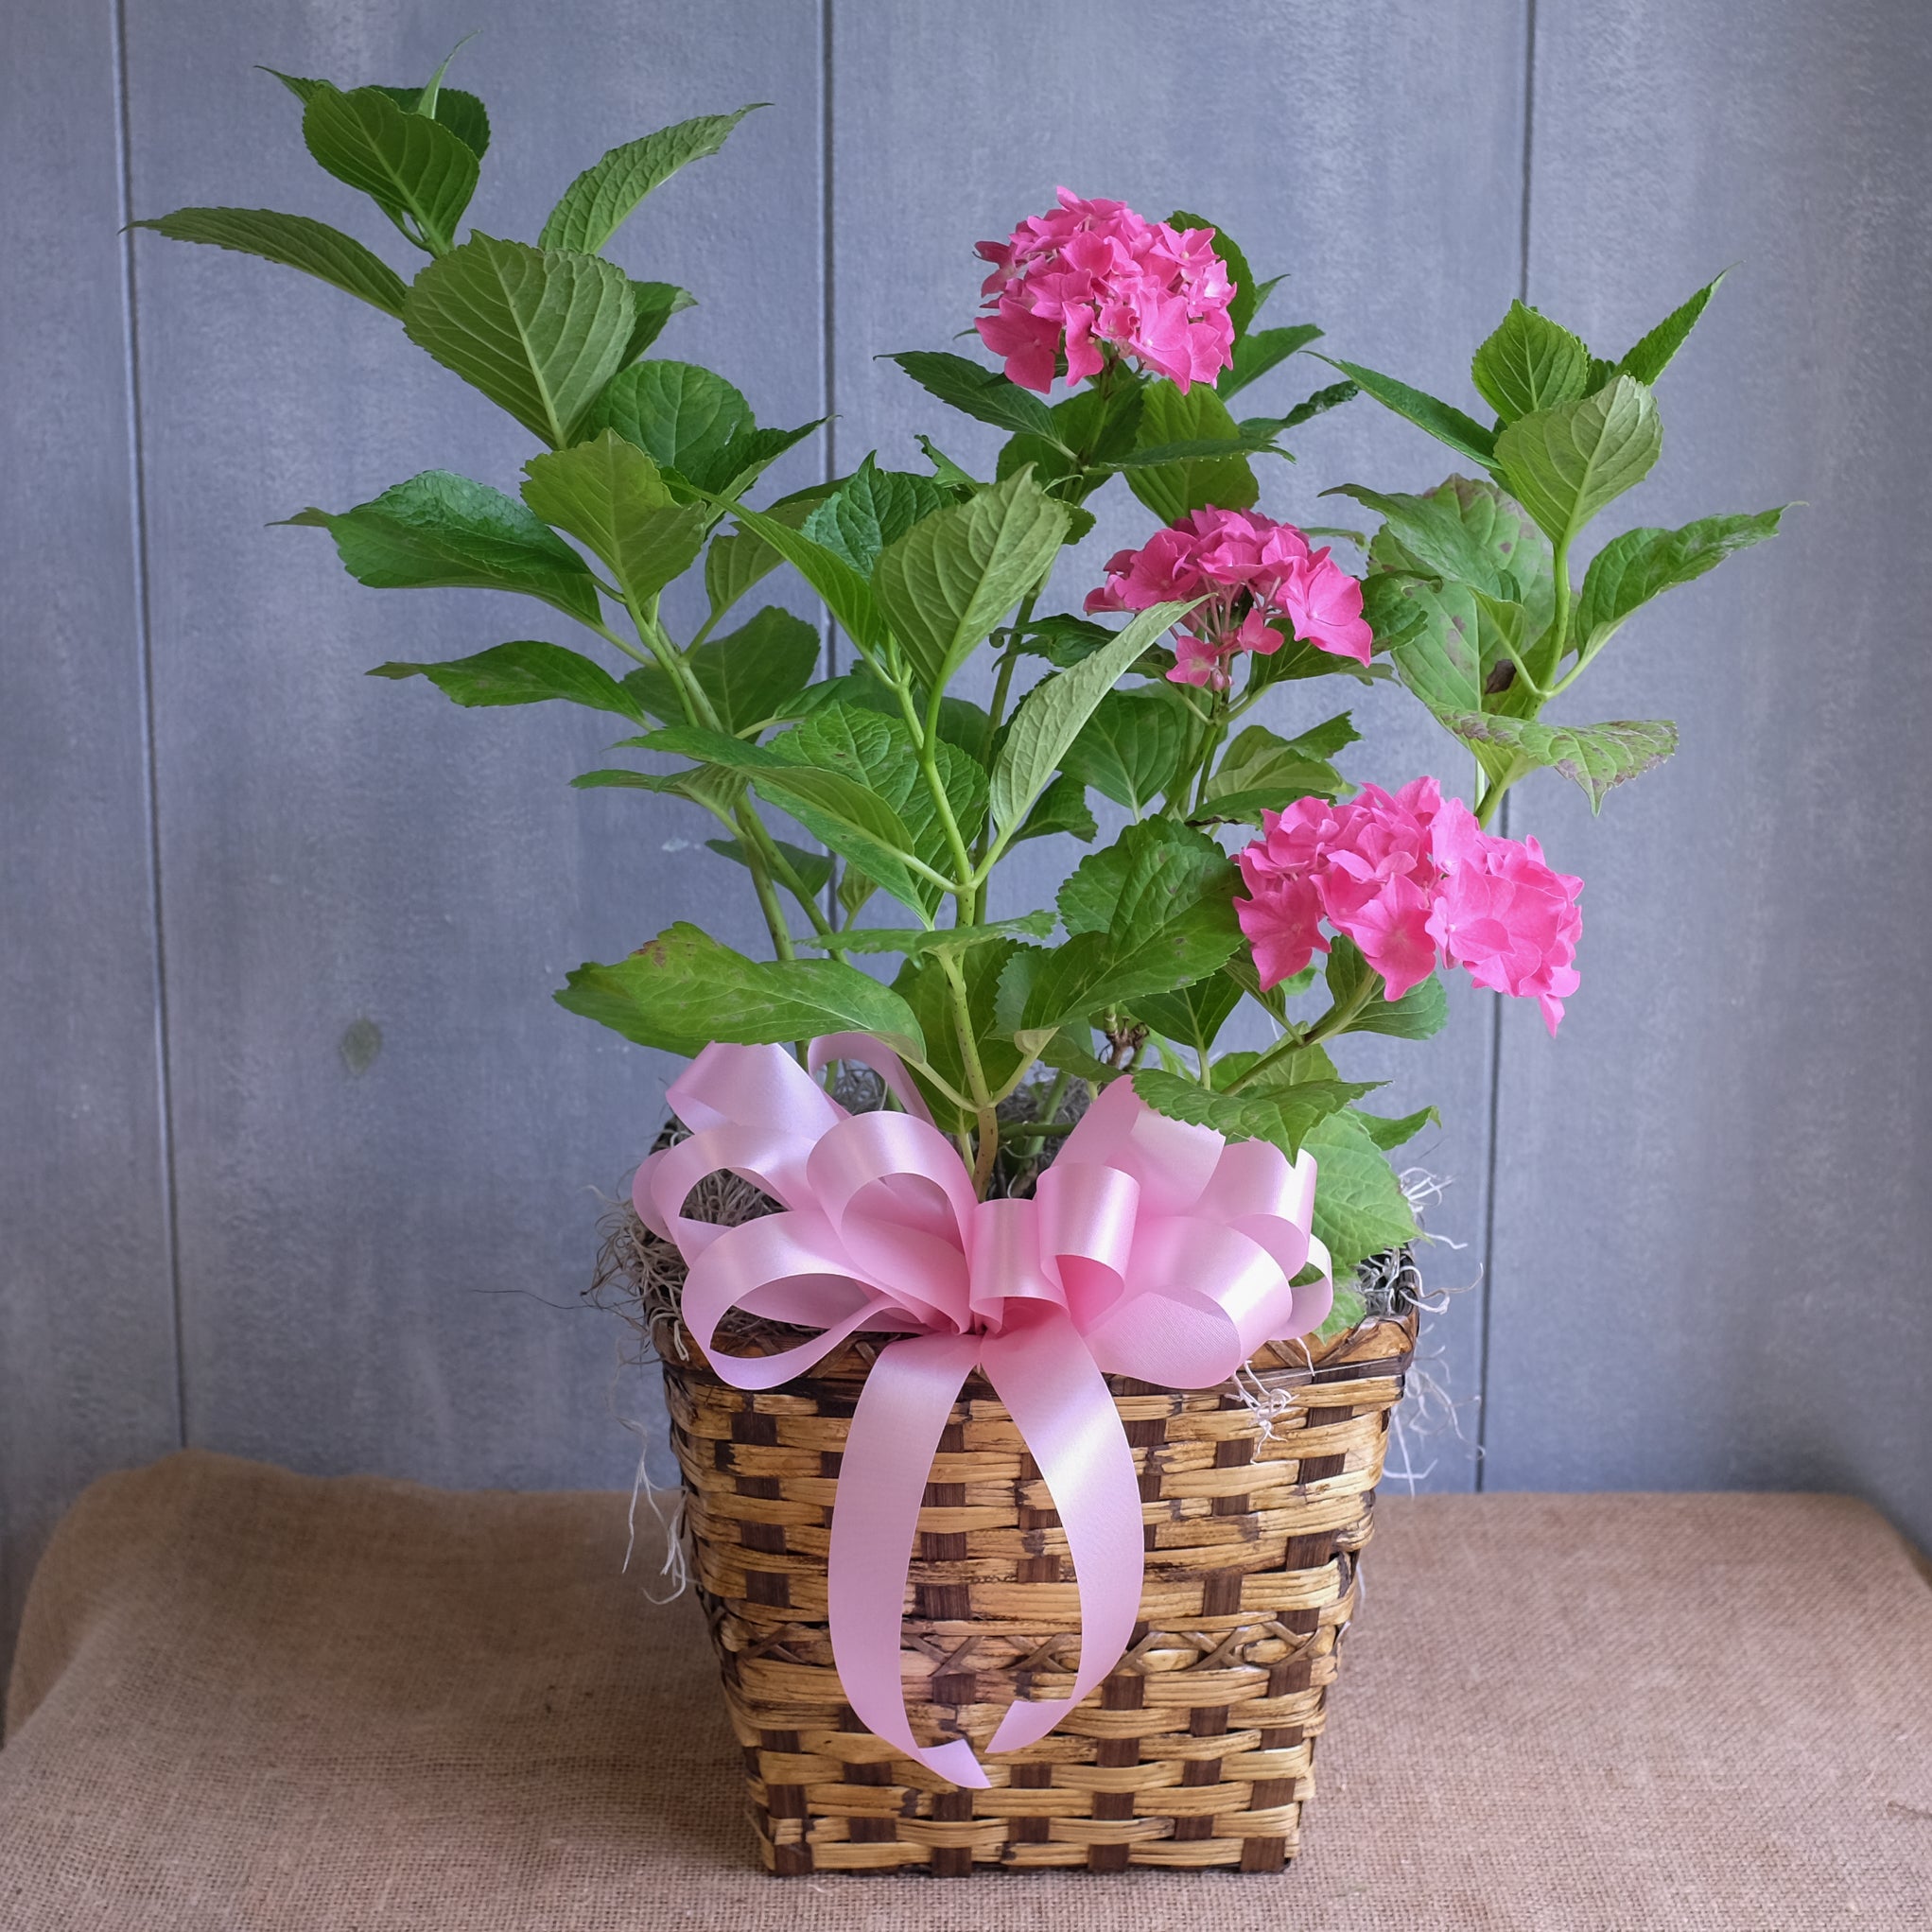 Pink blooming hydrangea shrub in a basket.